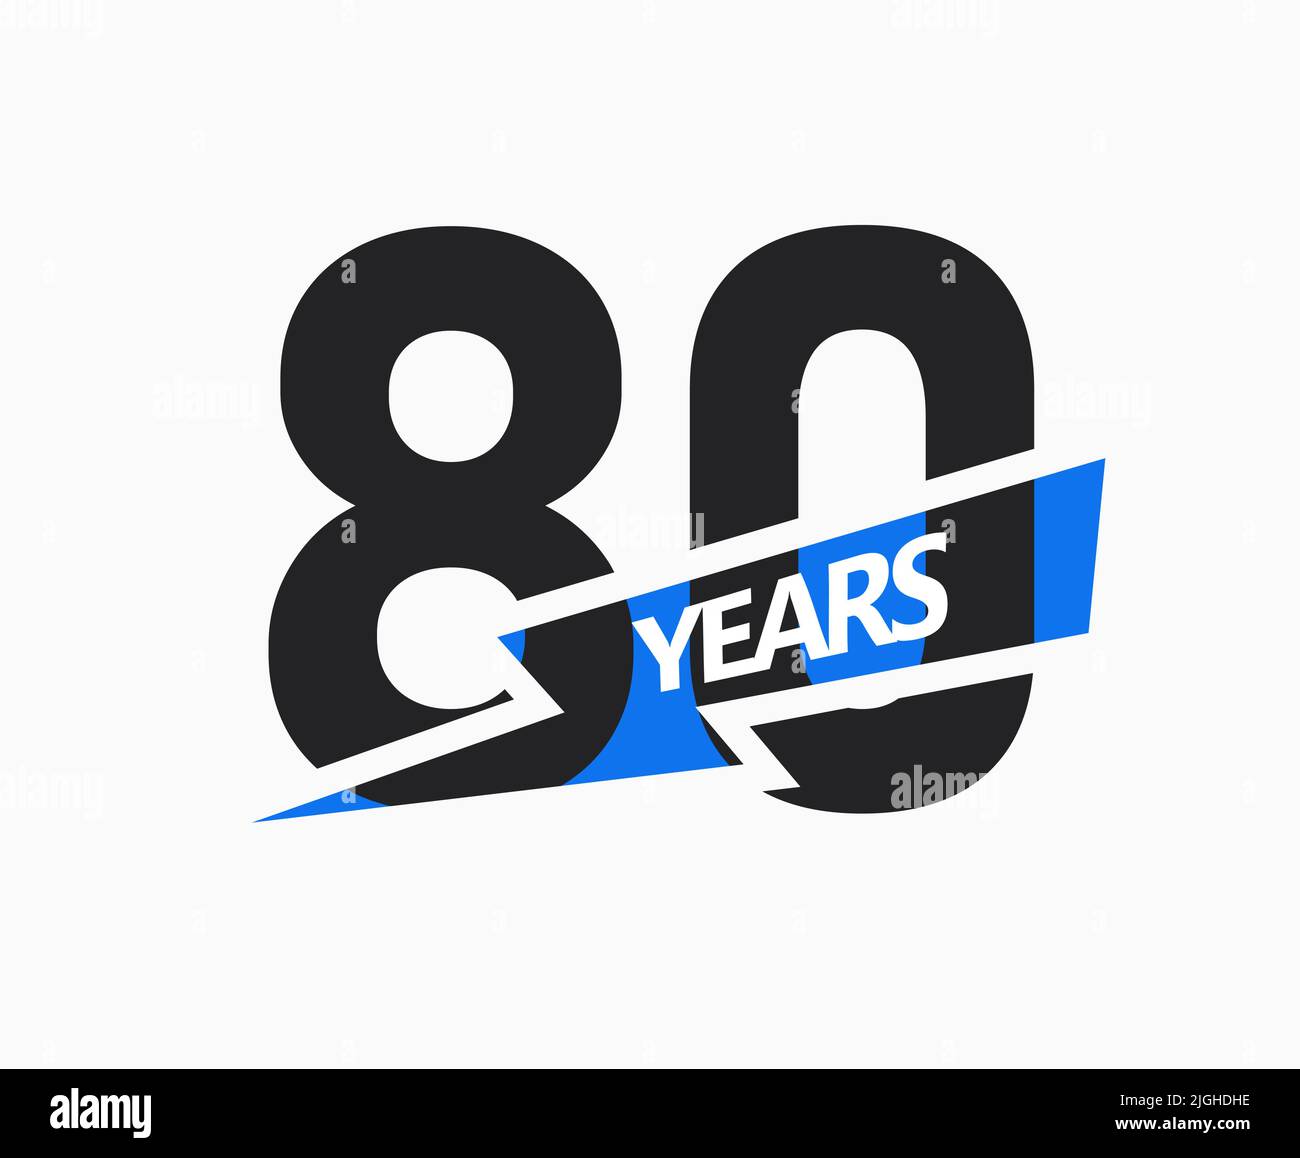 80 years of business, jubilee logo. 80th Anniversary sign. Modern graphic design for company birthday. Isolated vector illustration. Stock Vector